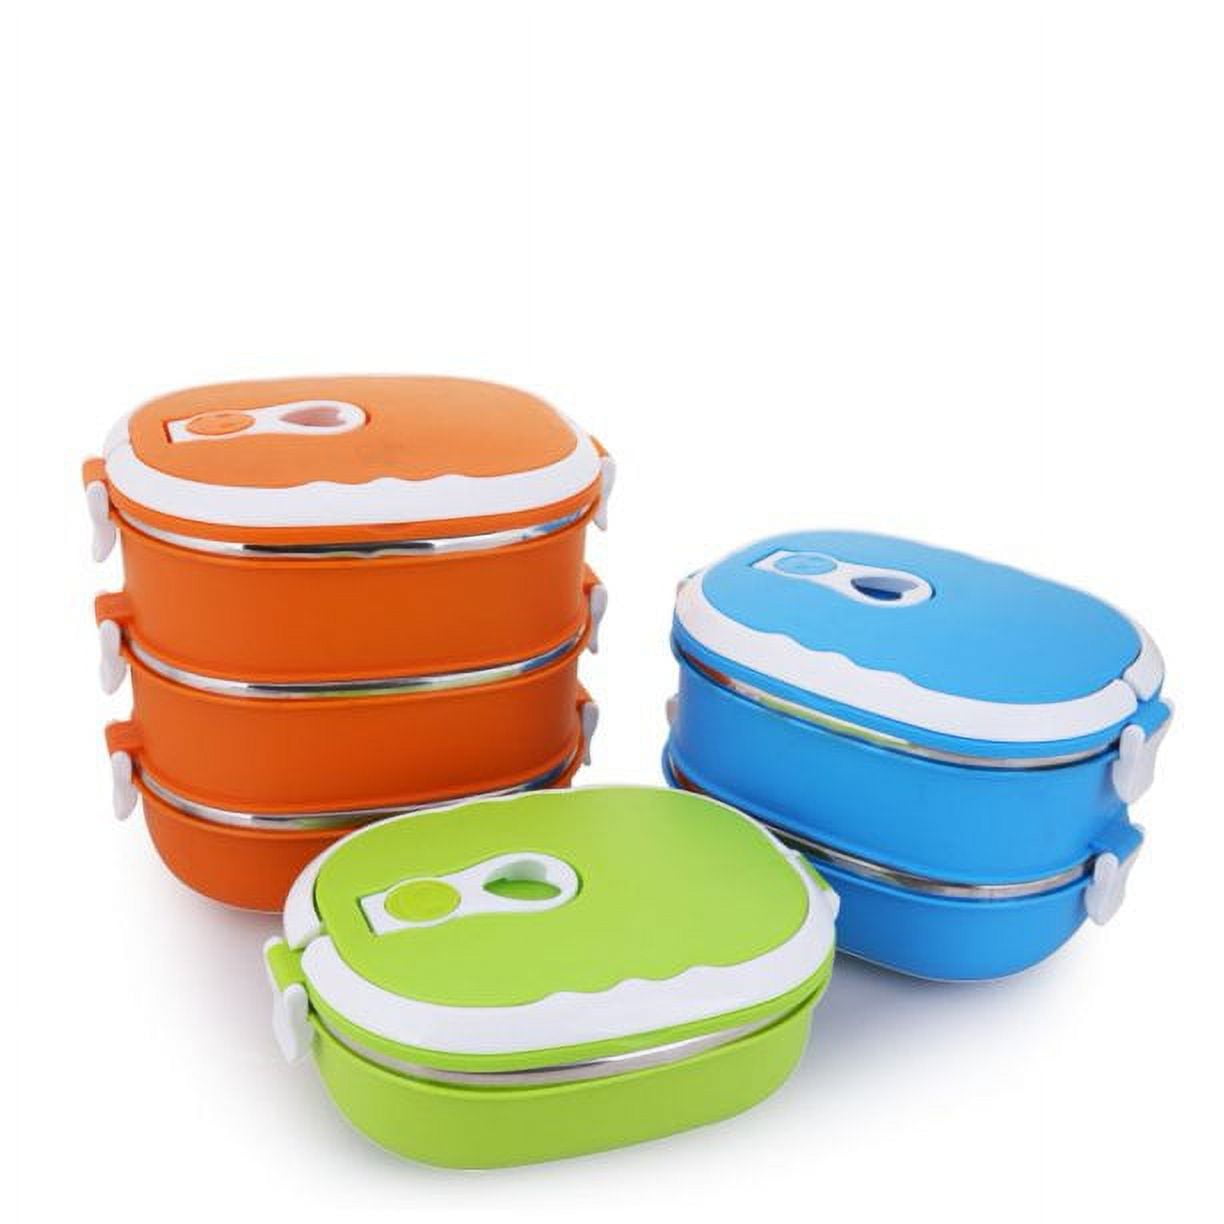 HOTBEST Portable Food Warmer School Lunch Box Bento Thermal Insulated Food  Container Stainless Steel Insulated Square Lunch Box for Children, Kids and  Adult Portable Picnic Storage Boxes 